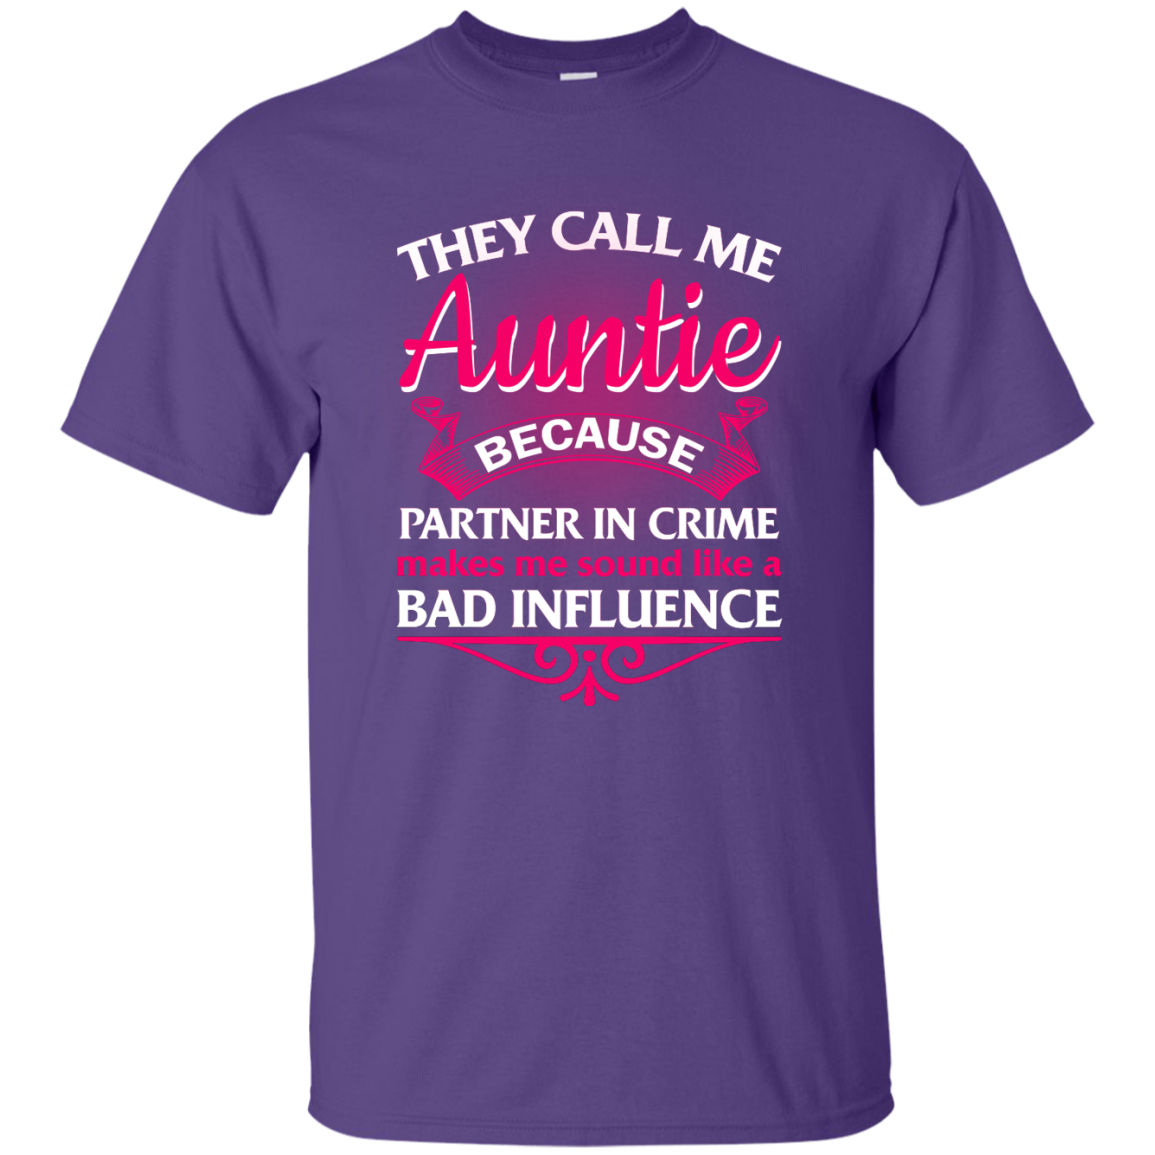 They Call Me Auntie Because Partner In Crime Makes Me shirt, hoodie, t